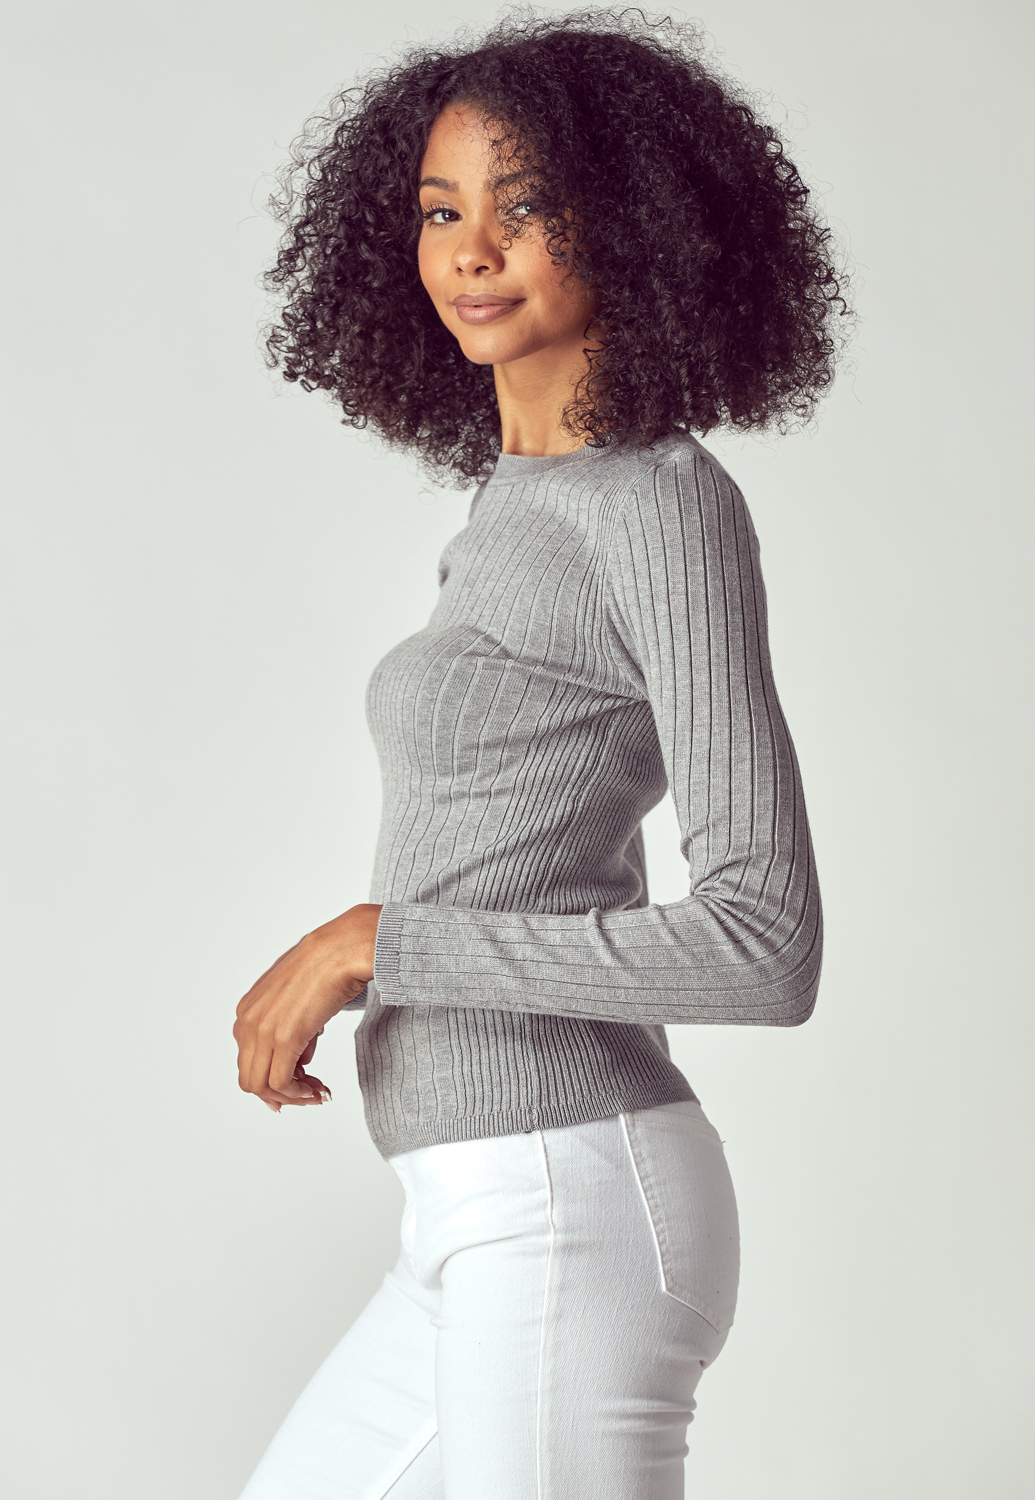 Round Neck Ribbed Knit Sweater